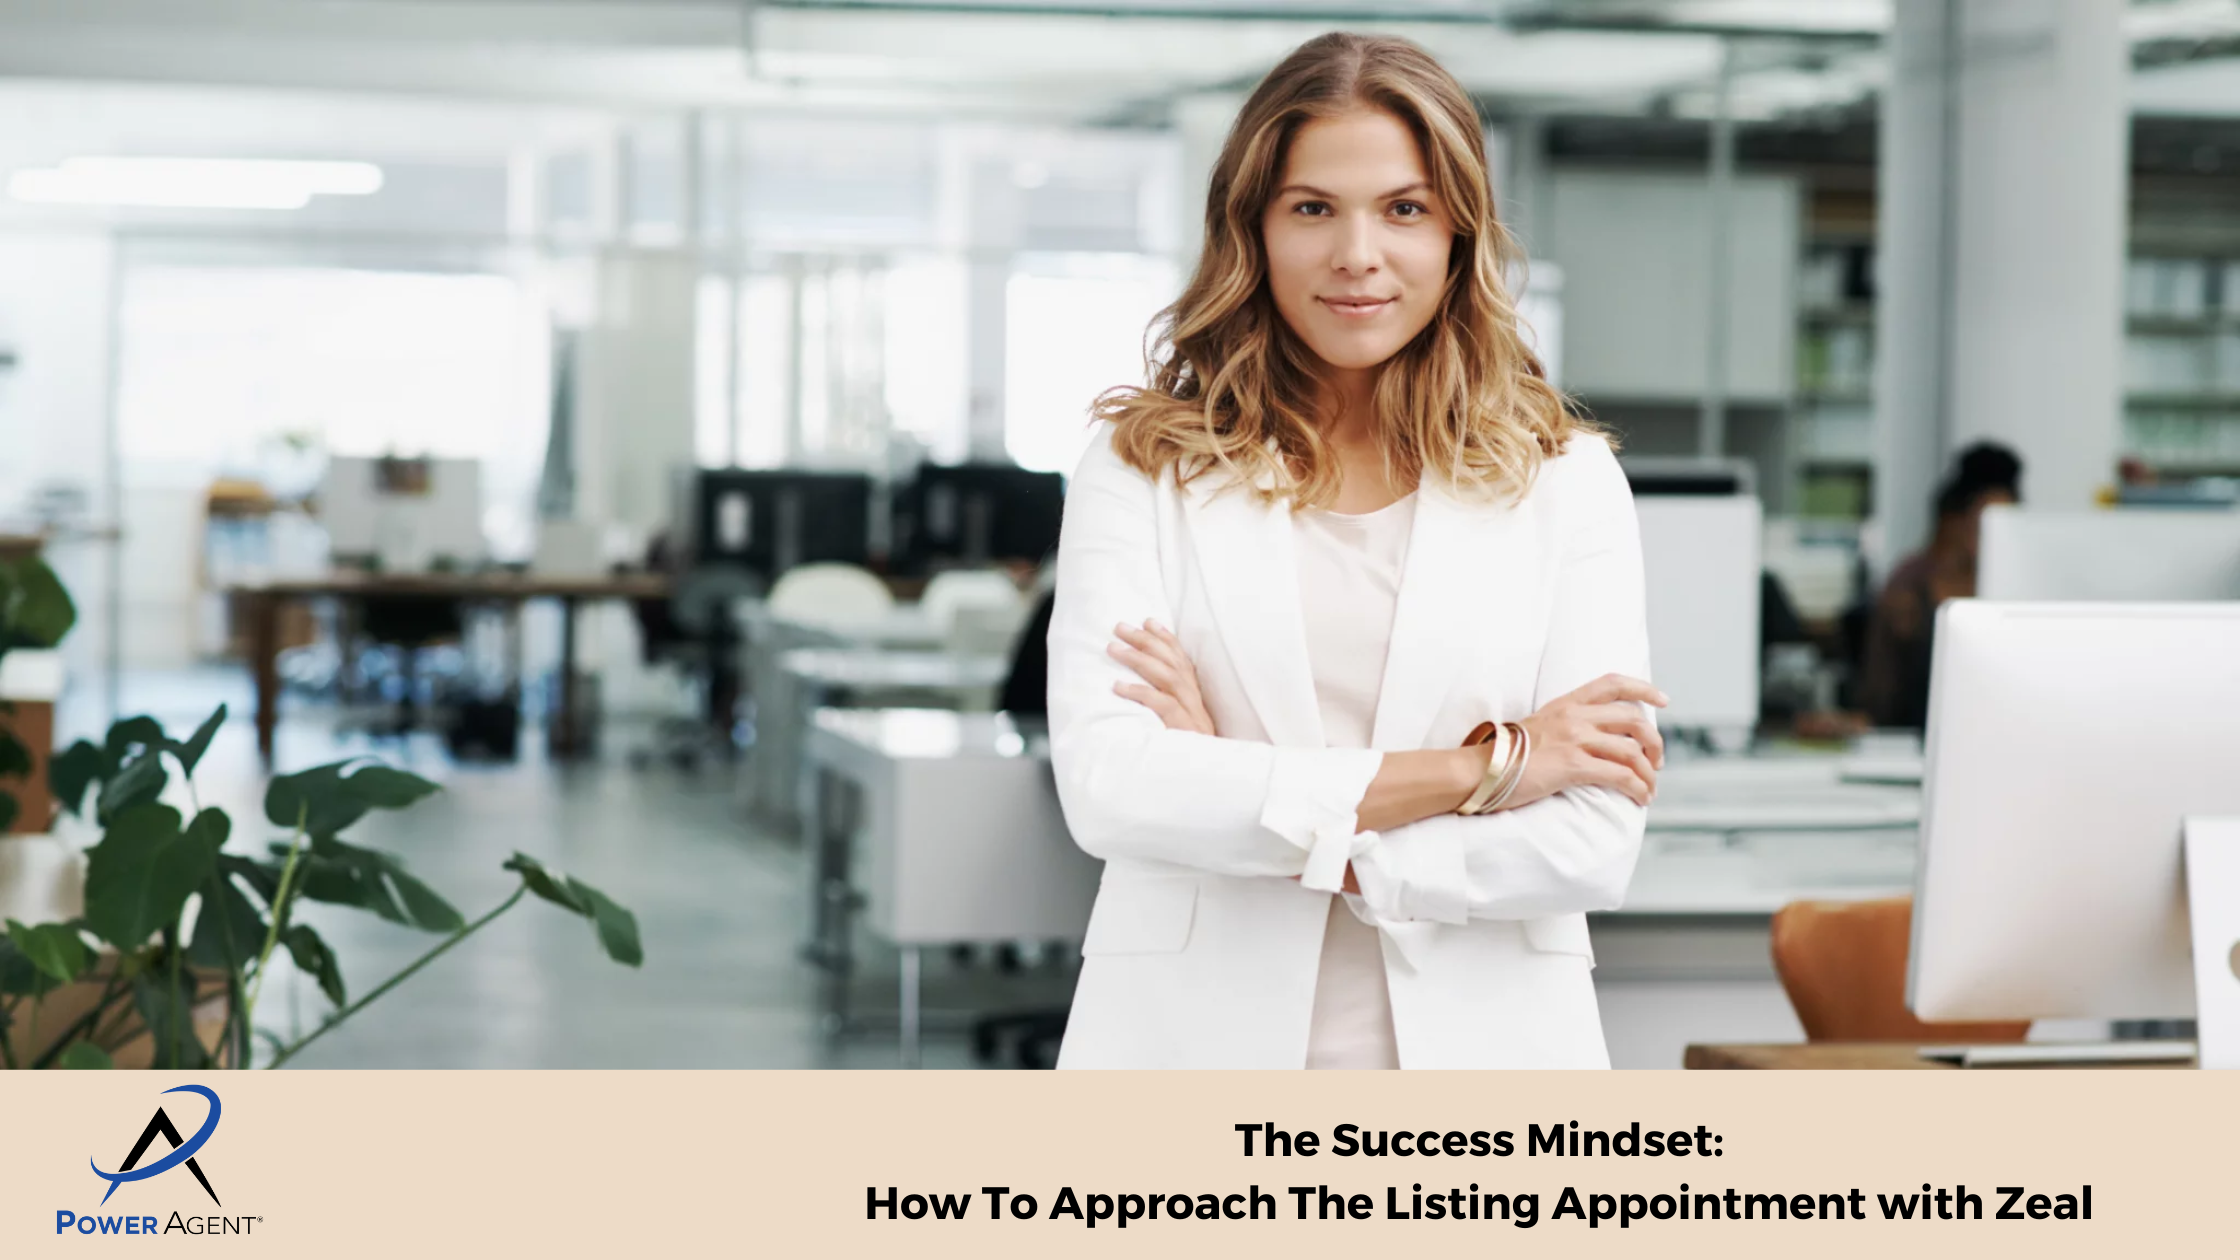 The Success Mindset: How To Approach The Listing Appointment with Zeal